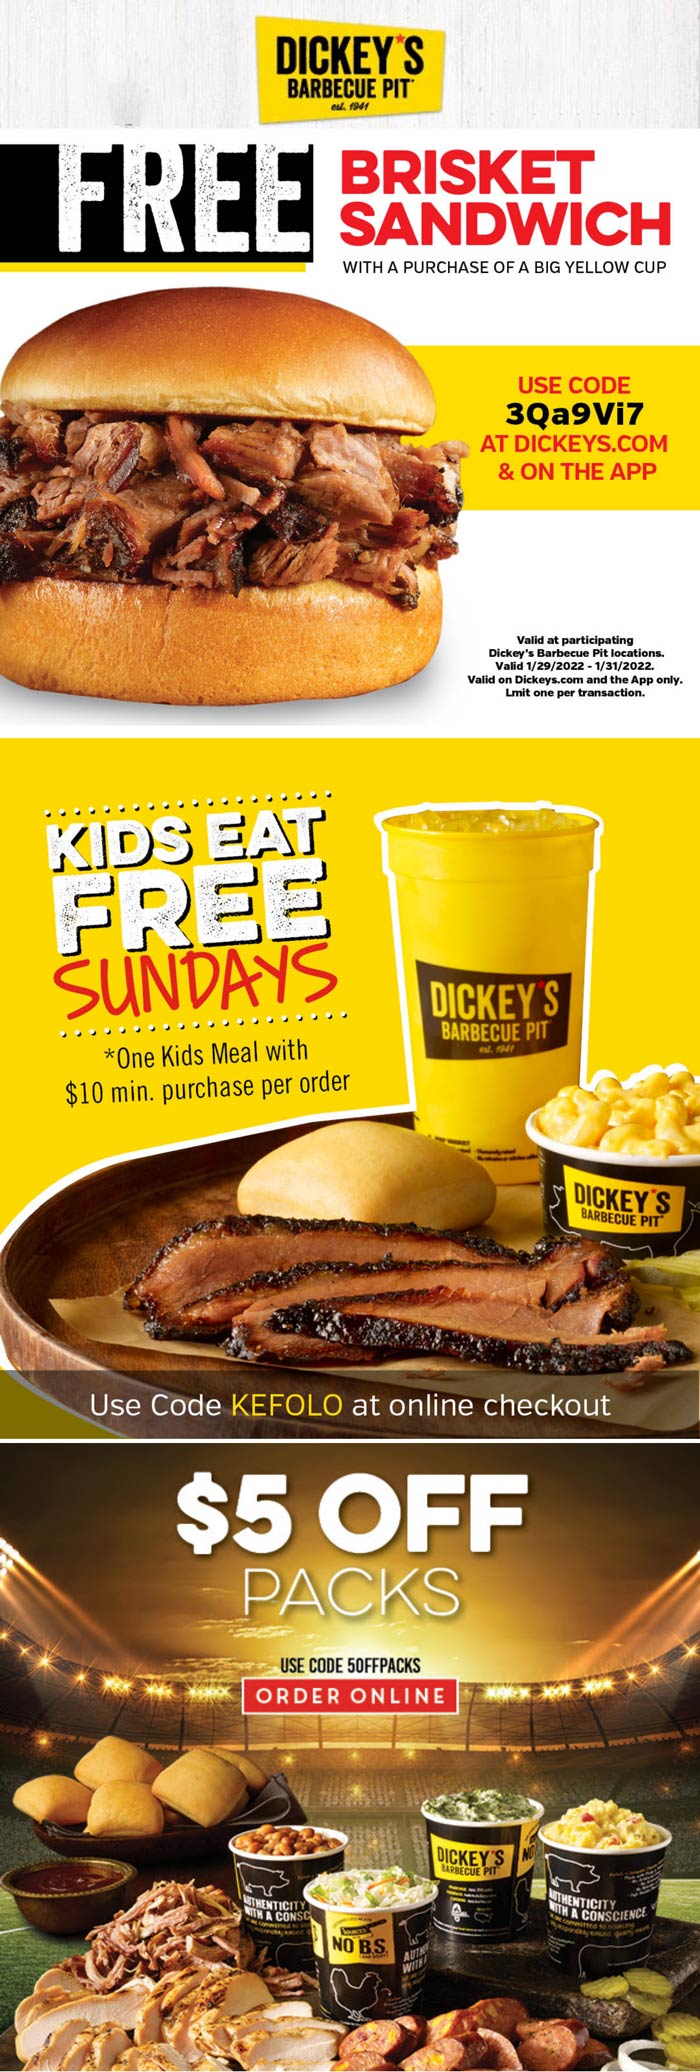 Dickeys Barbecue Pit restaurants Coupon  Free brisket sandwich with your drink & more at Dickeys Barbecue Pit via promo code 3Qa9Vi7 #dickeysbarbecuepit 